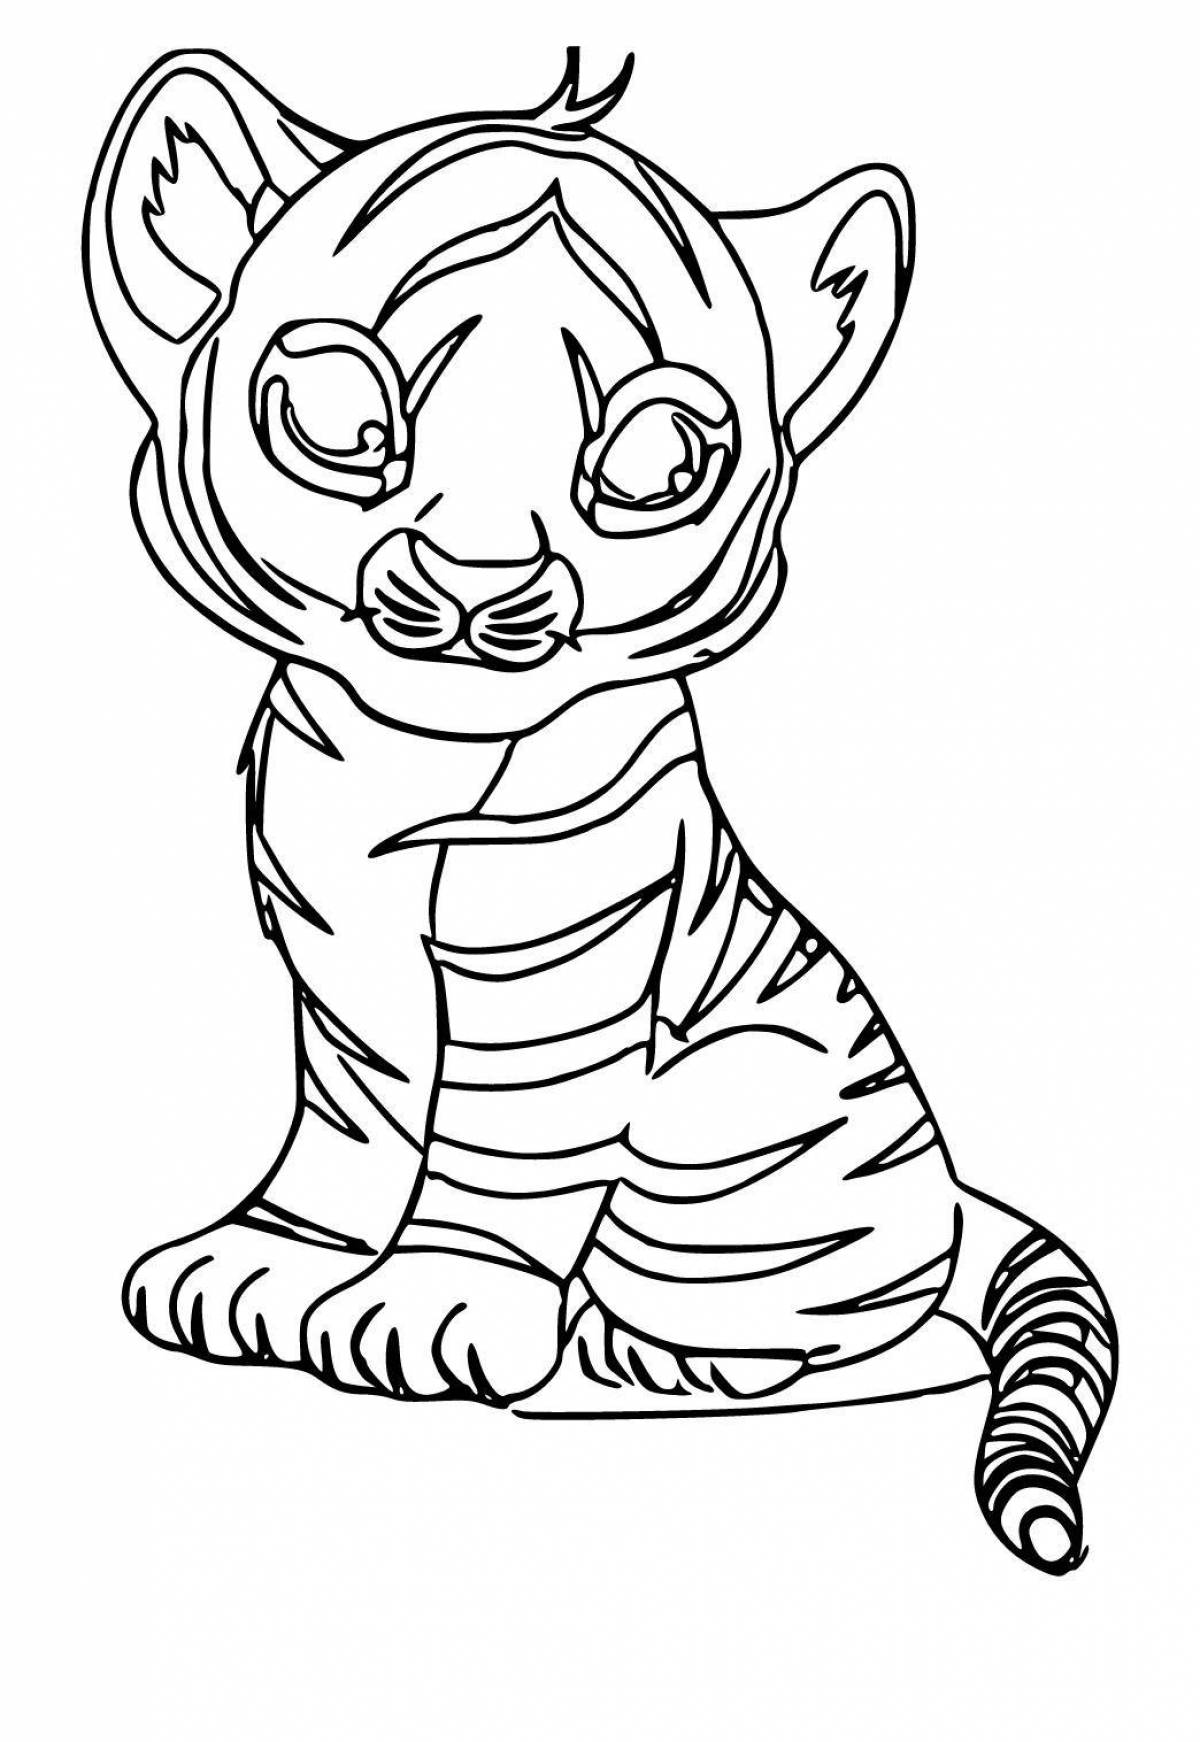 Intriguing tiger coloring book for 3-4 year olds